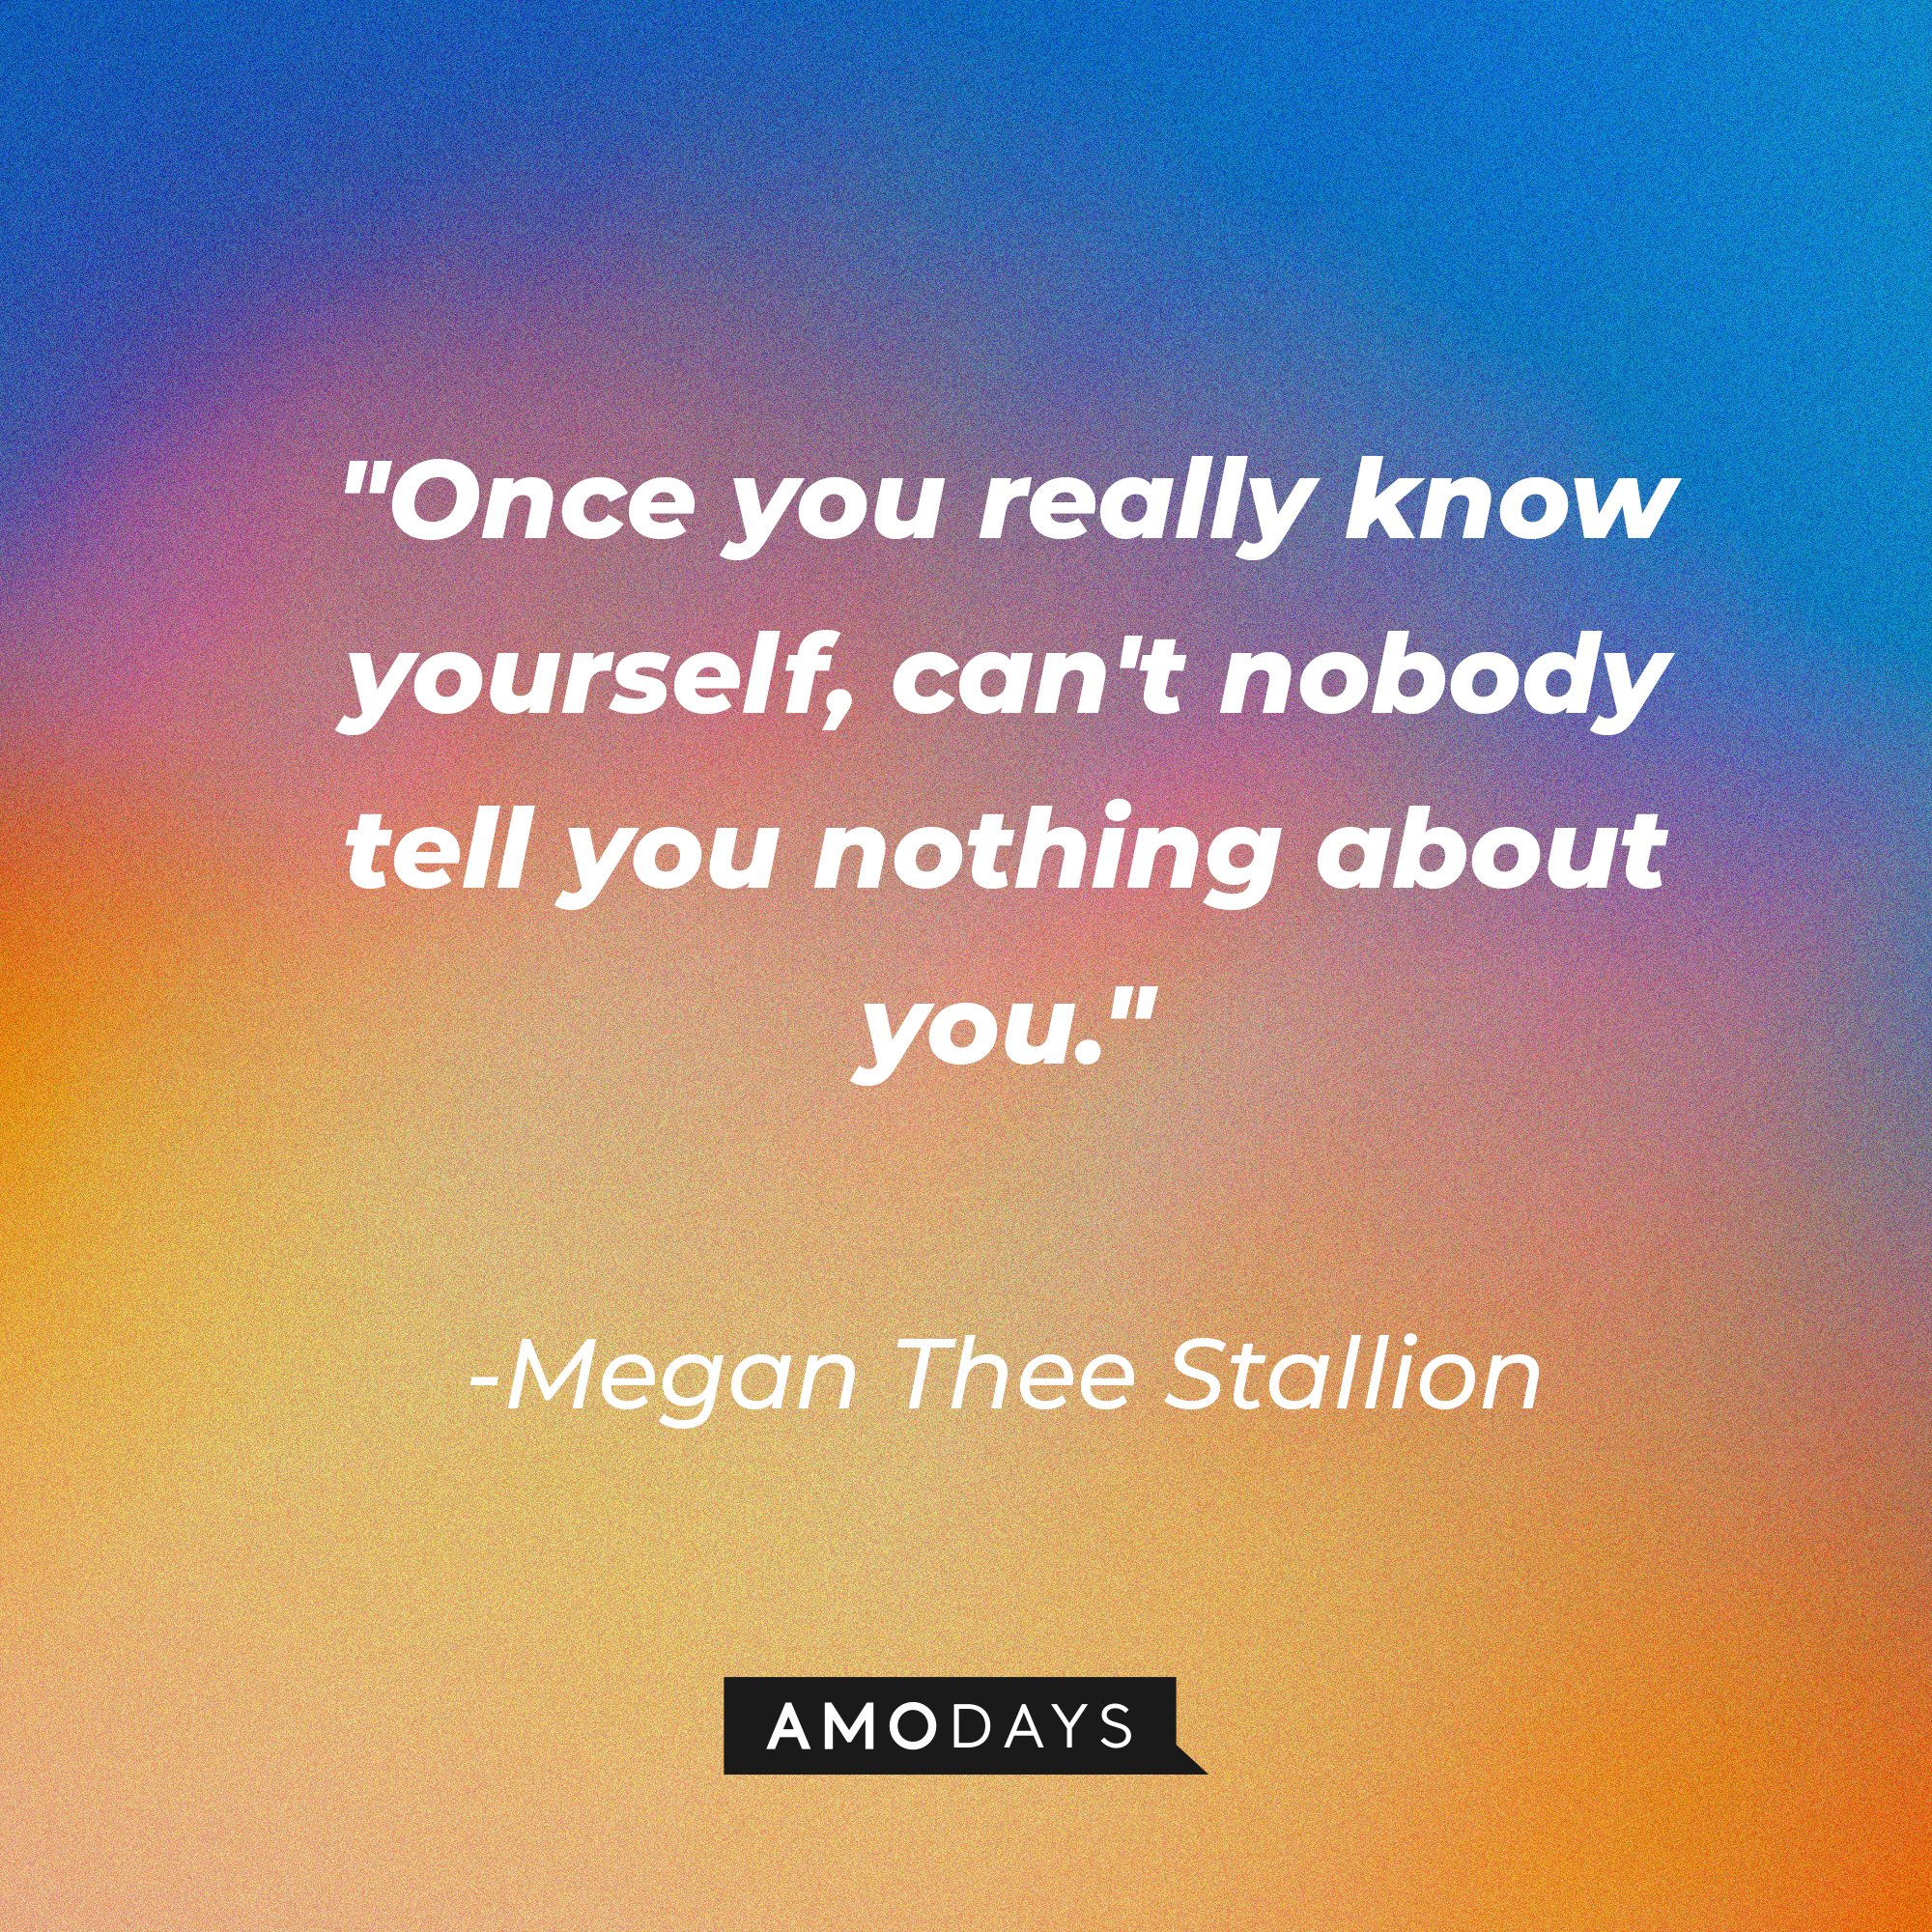 Megan Thee Stallion’s quote: "Once you really know yourself, can't nobody tell you nothing about you."| Image: AmoDays